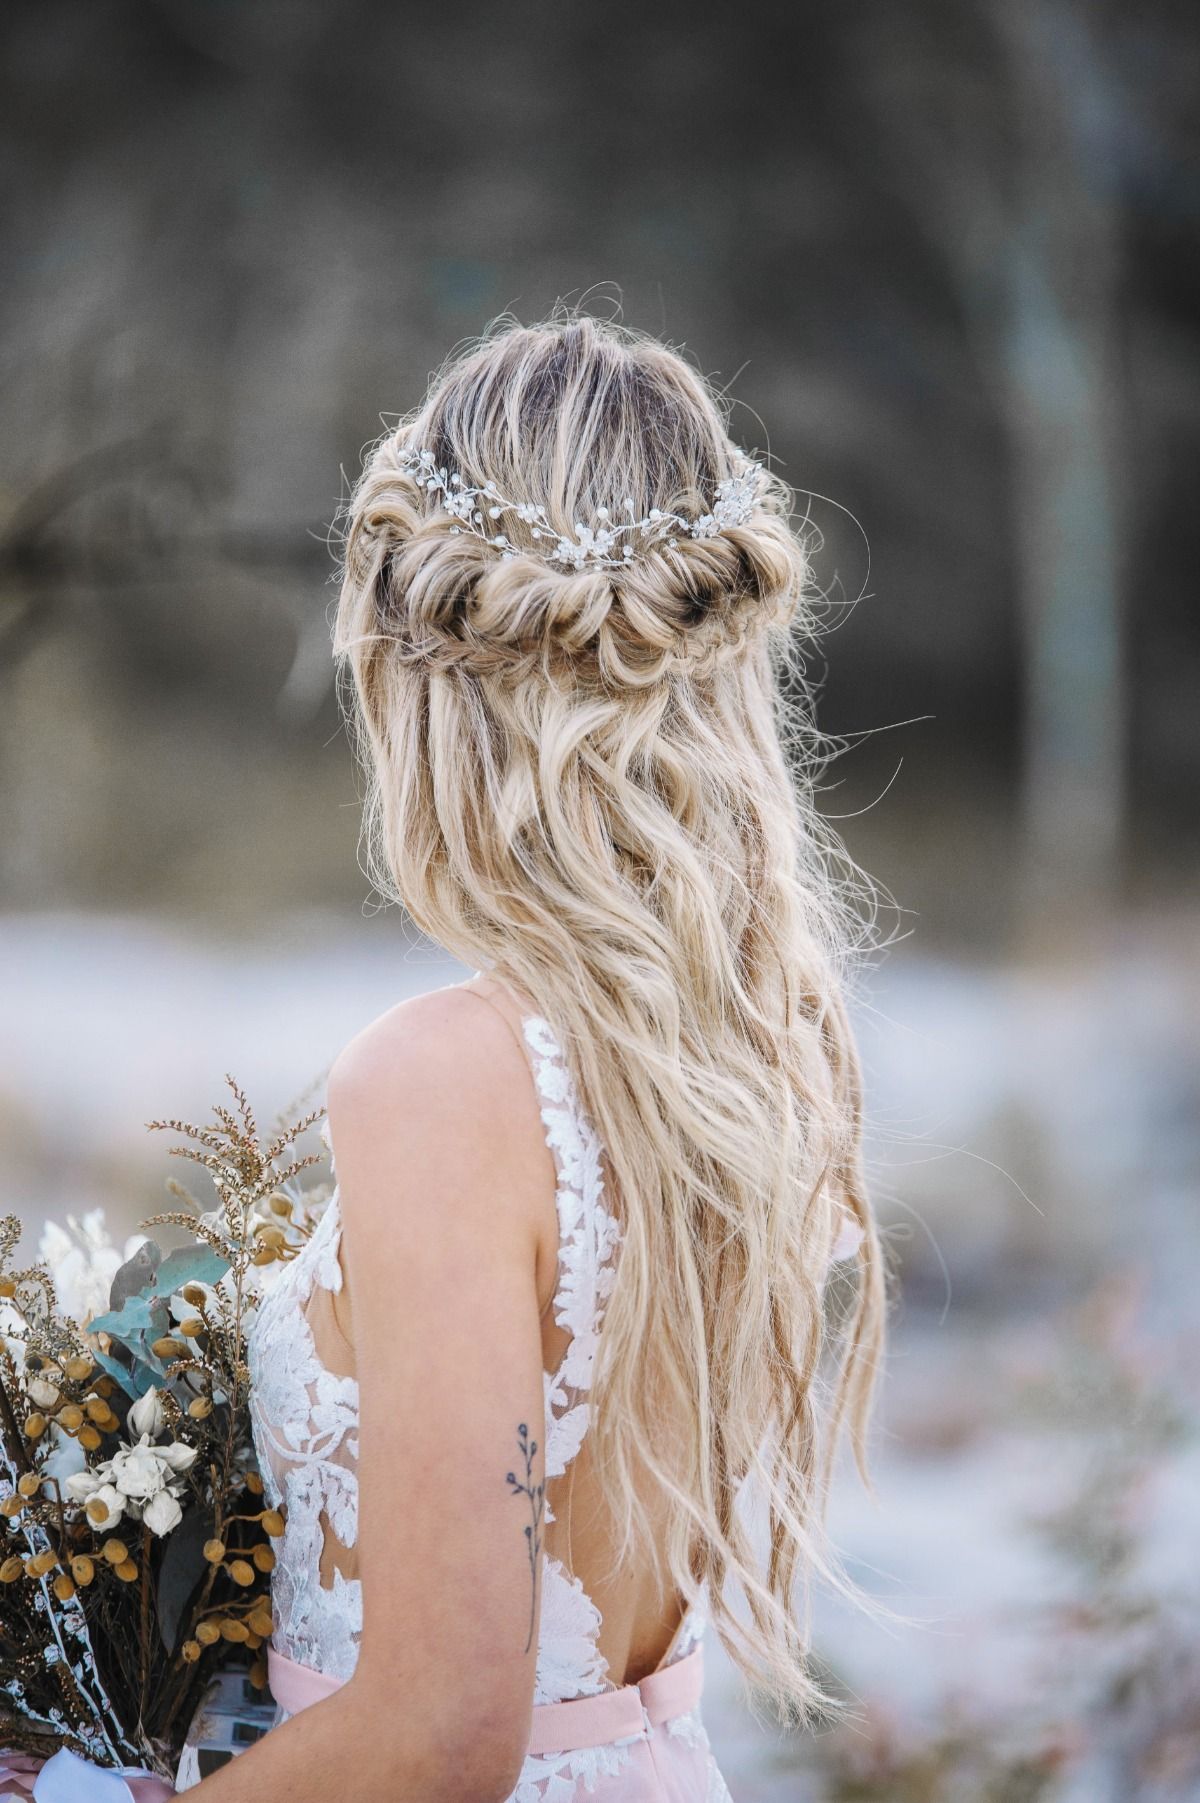 Winter Bridal Looks You Can't Help But Love -   8 winter wedding Hairstyles ideas